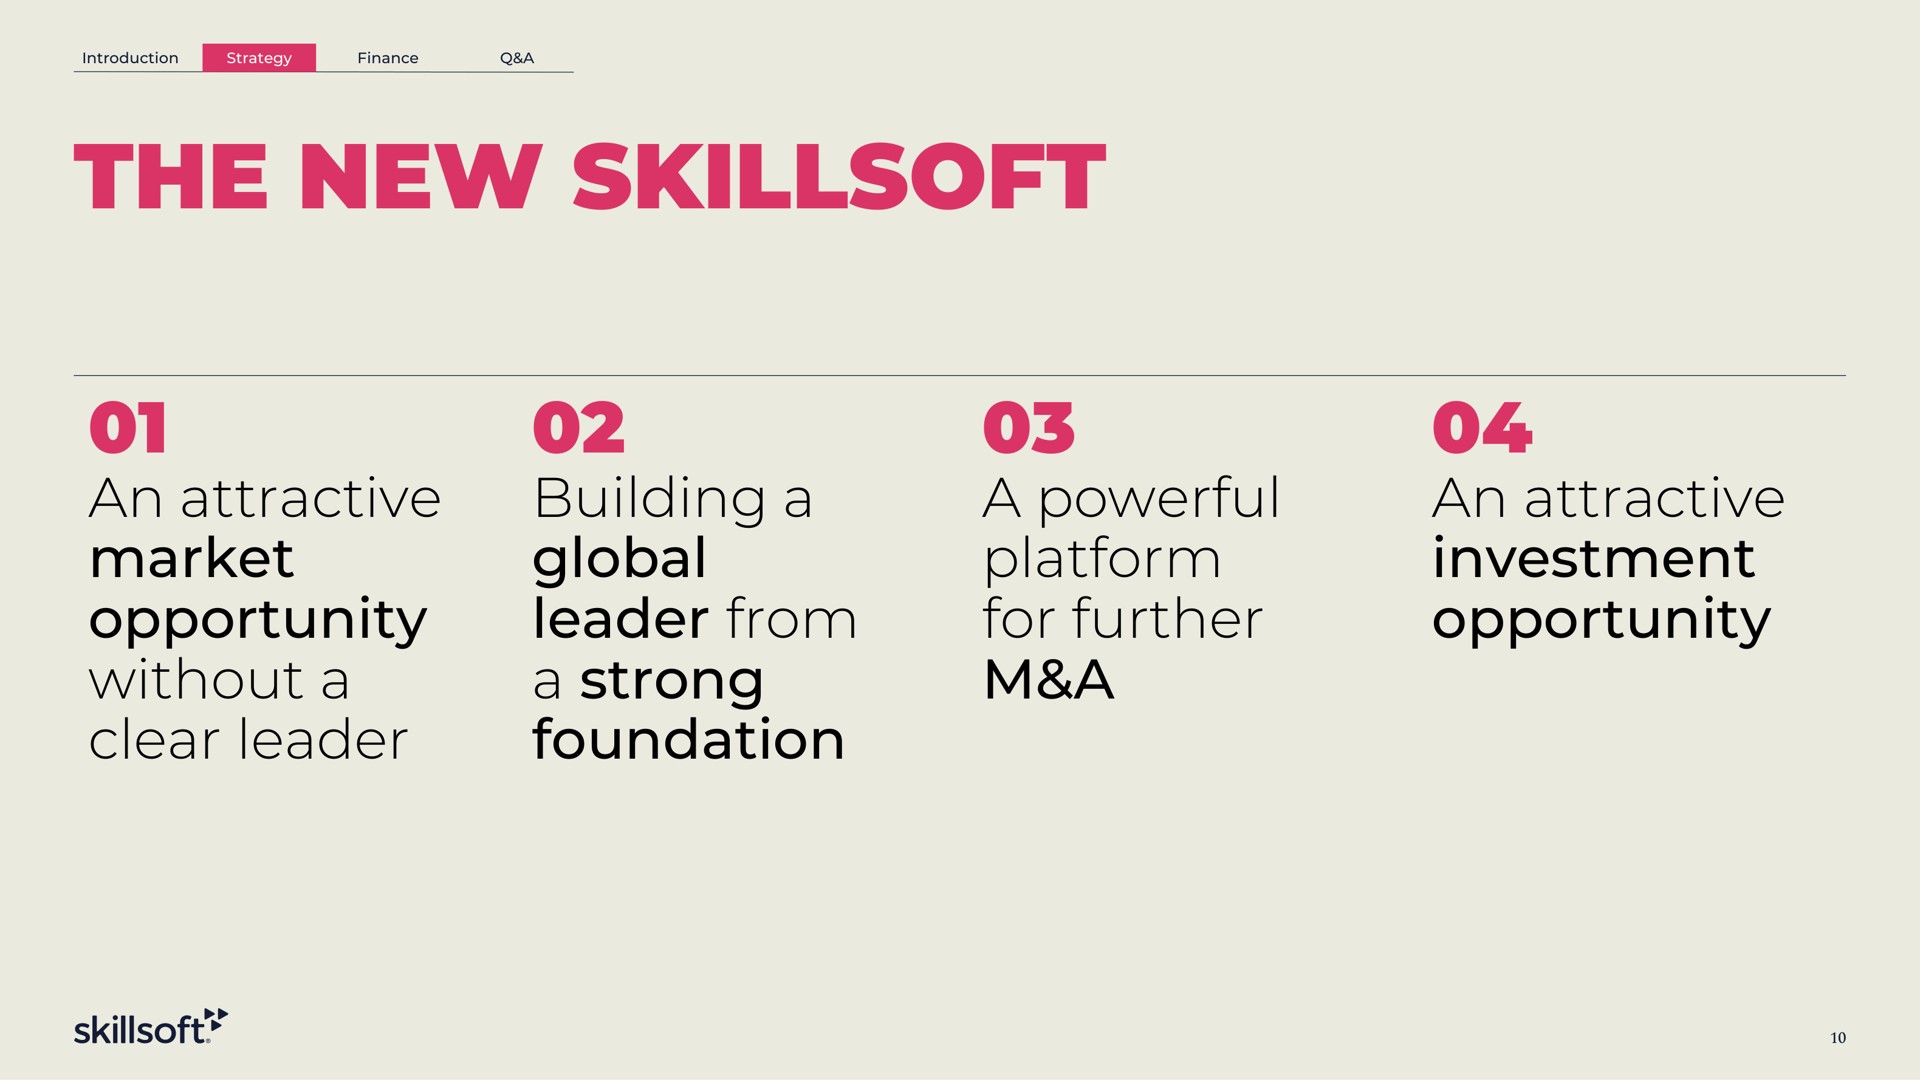 the new an attractive market opportunity without a clear leader building a global leader from a strong foundation a powerful platform for further a an attractive investment opportunity | Skillsoft